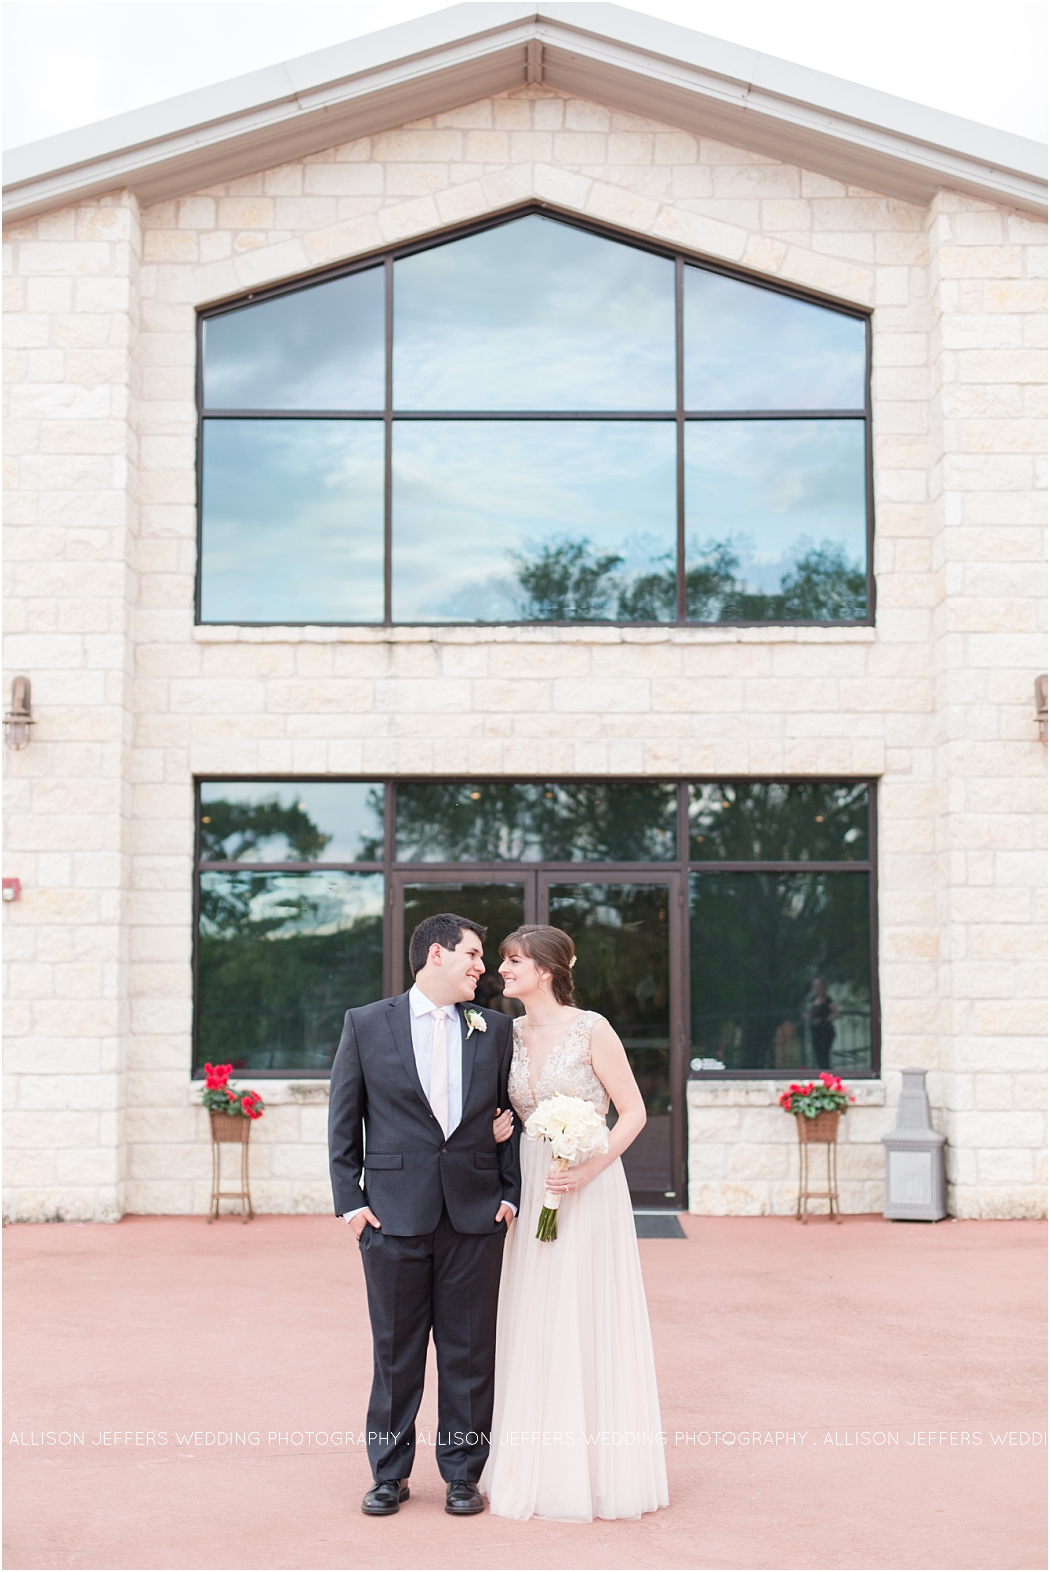 a-teal-and-blush-wedding-at-lakeside-pavillion-in-marble-falls-texas-by-allison-jeffers-wedding-photography-austin-wedding-photographer_0053